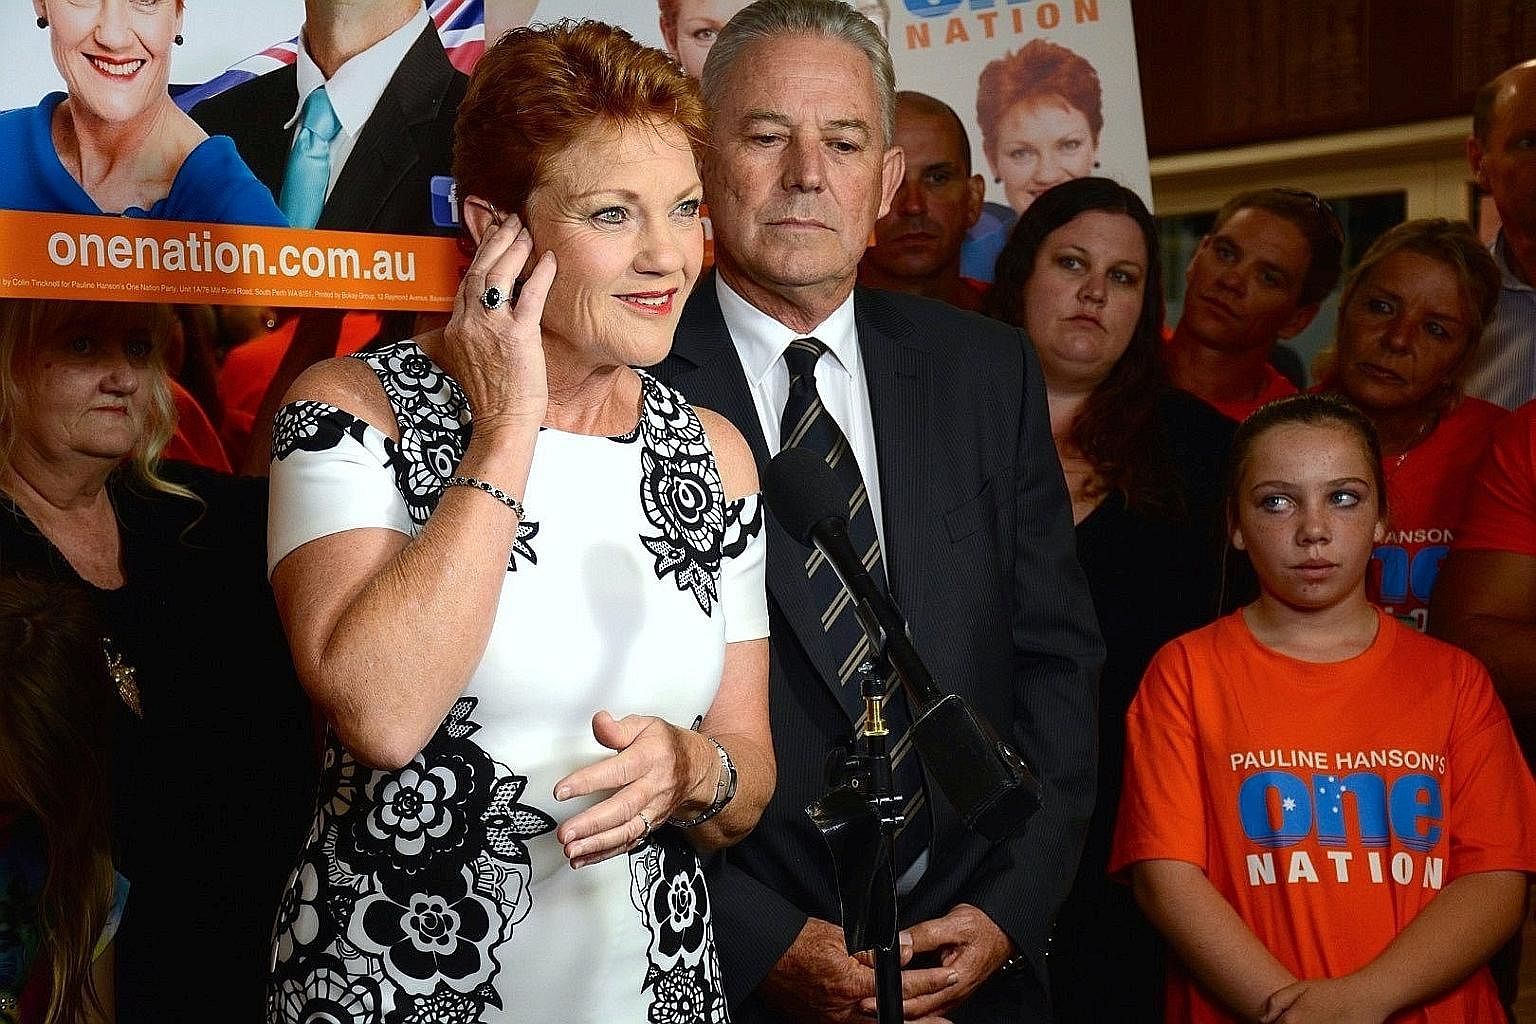 Ms Hanson at a One Nation election function in Perth, Western Australia, on Saturday. Despite the poor result for her party, she showed no sign of giving up on her far-flung ambitions. She even denied her party had floundered and insisted they had do